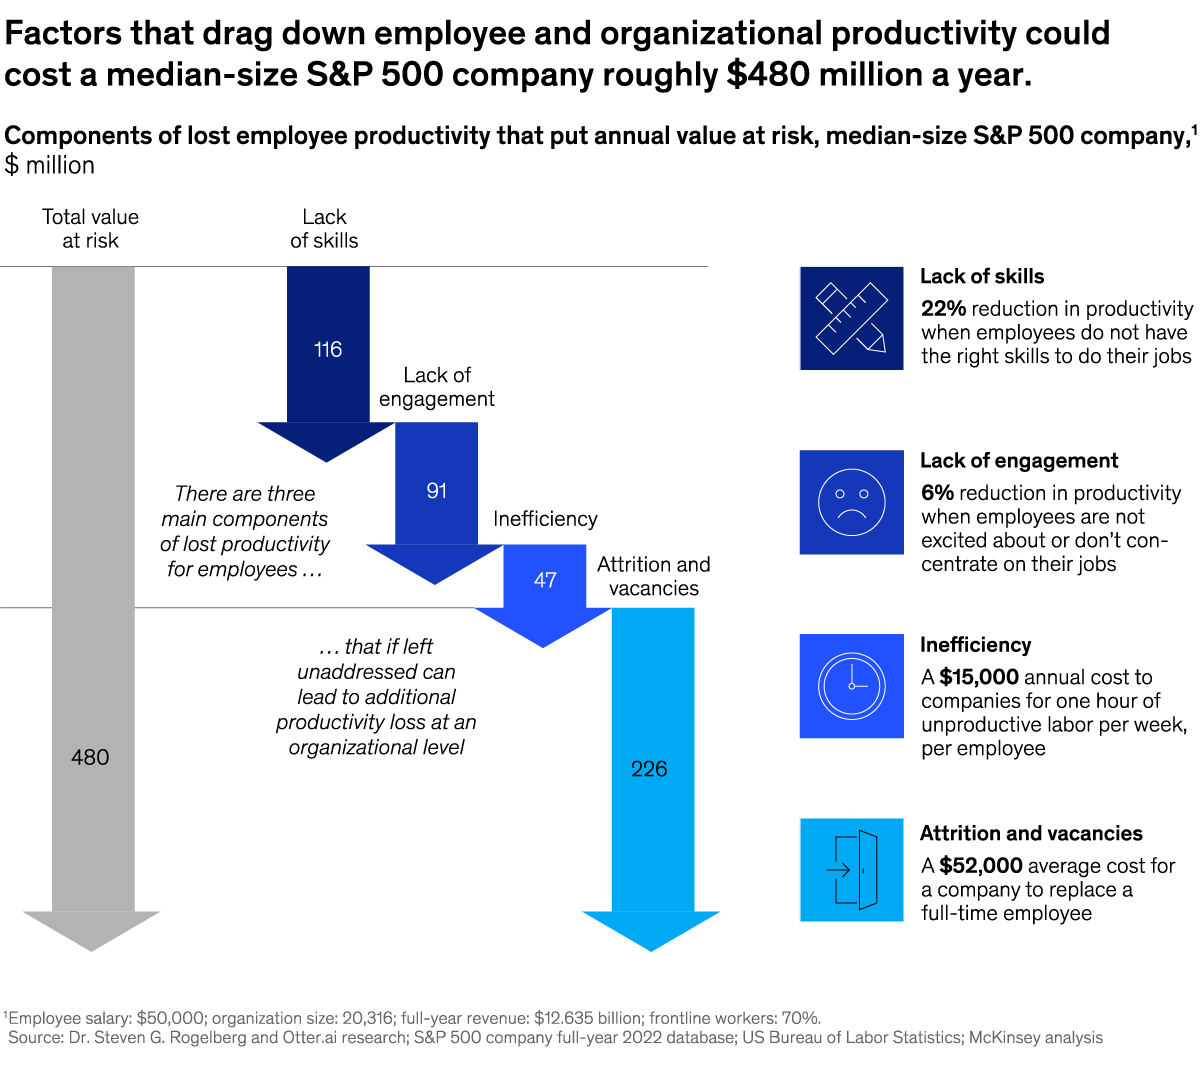 A chart titled “Factors that drag down employee and organizational productivity could cost a median-size S&P 500 company roughly $480 million a year.” Click to open the full article on McKinsey.com.